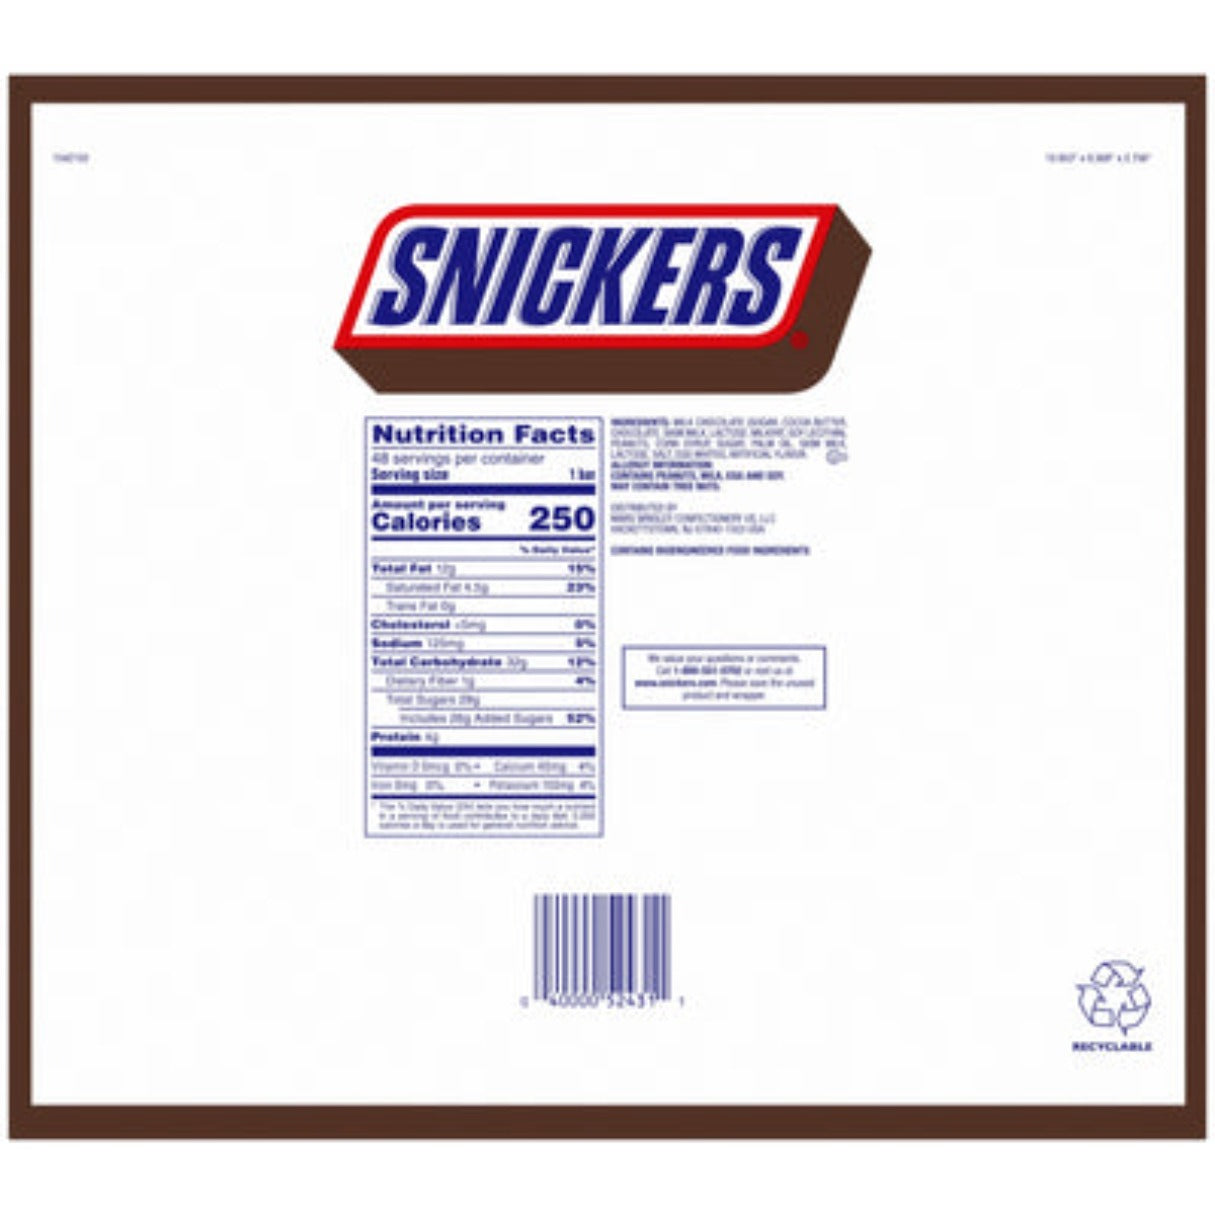 Snickers 1.86 oz - 48ct